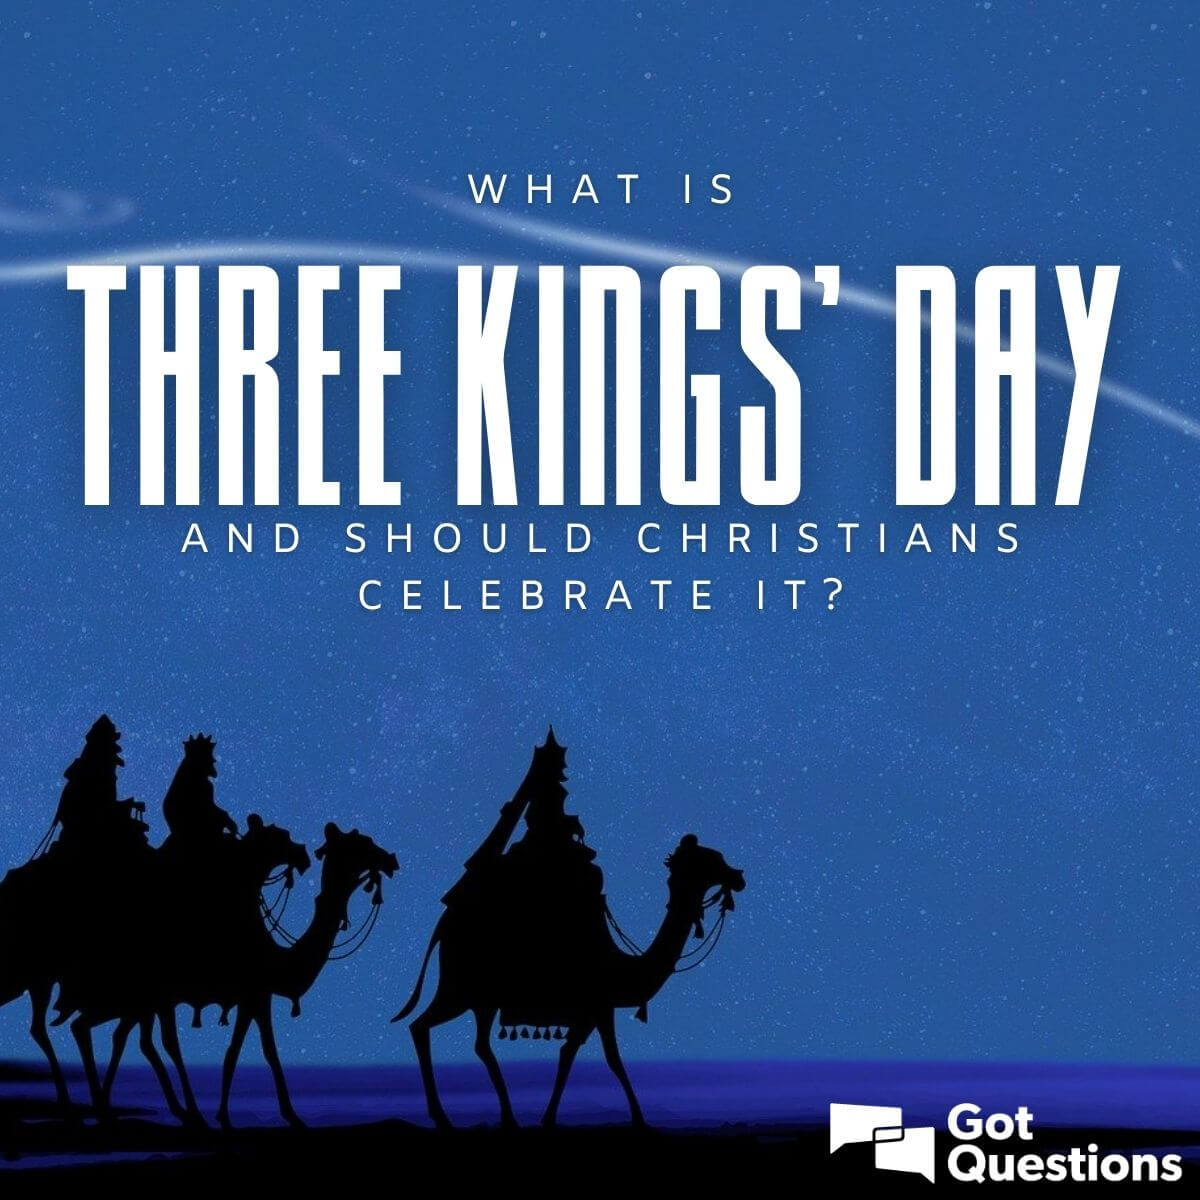 What is Epiphany / Three Kings’ Day and should Christians celebrate it